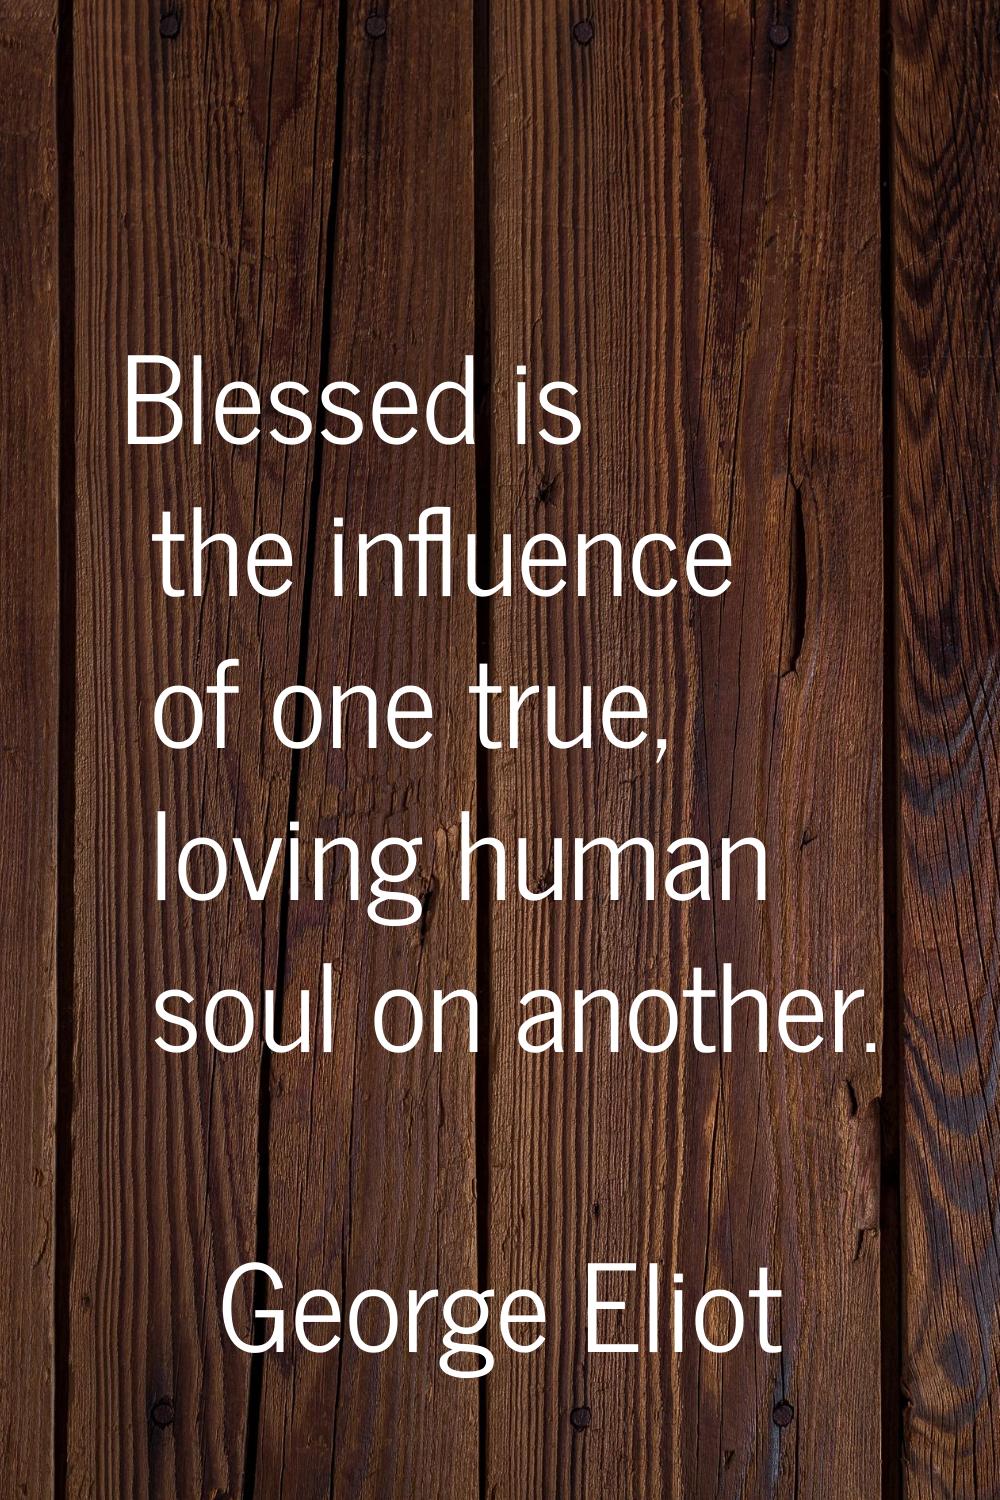 Blessed is the influence of one true, loving human soul on another.